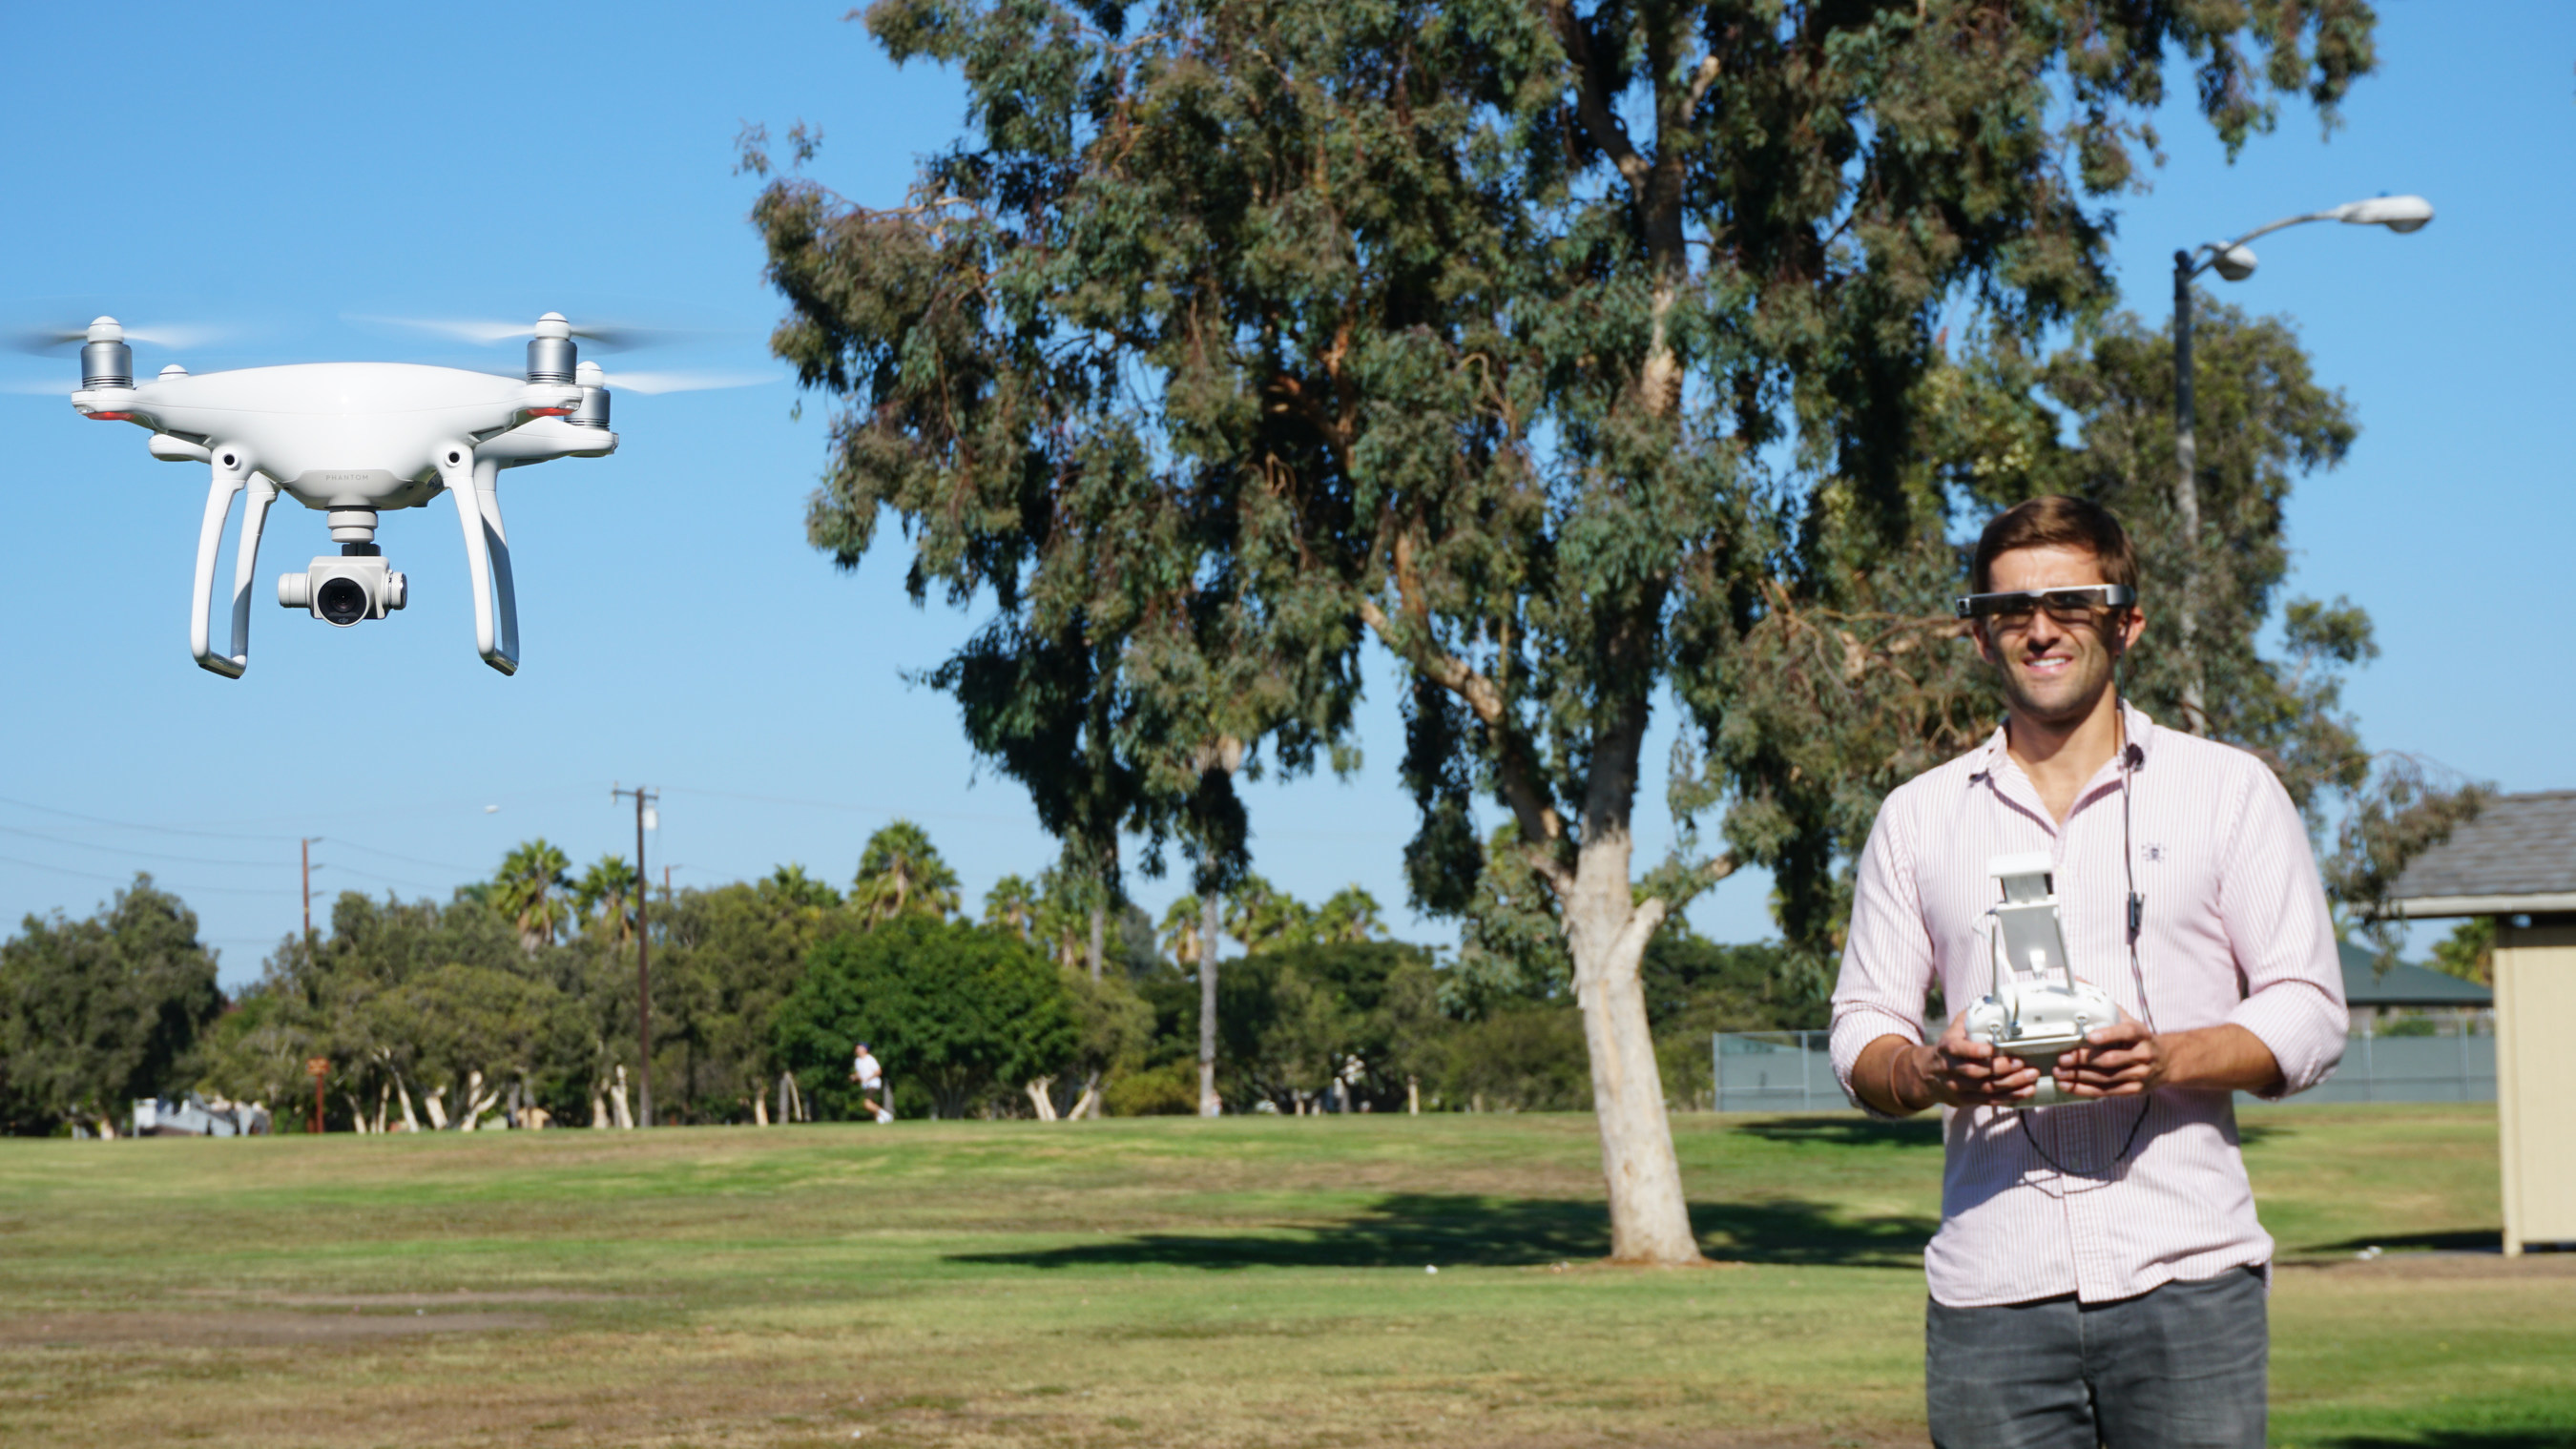 DJI Drone and BT-300, allows line-of-site while monitoring camera footage and telemetry data.